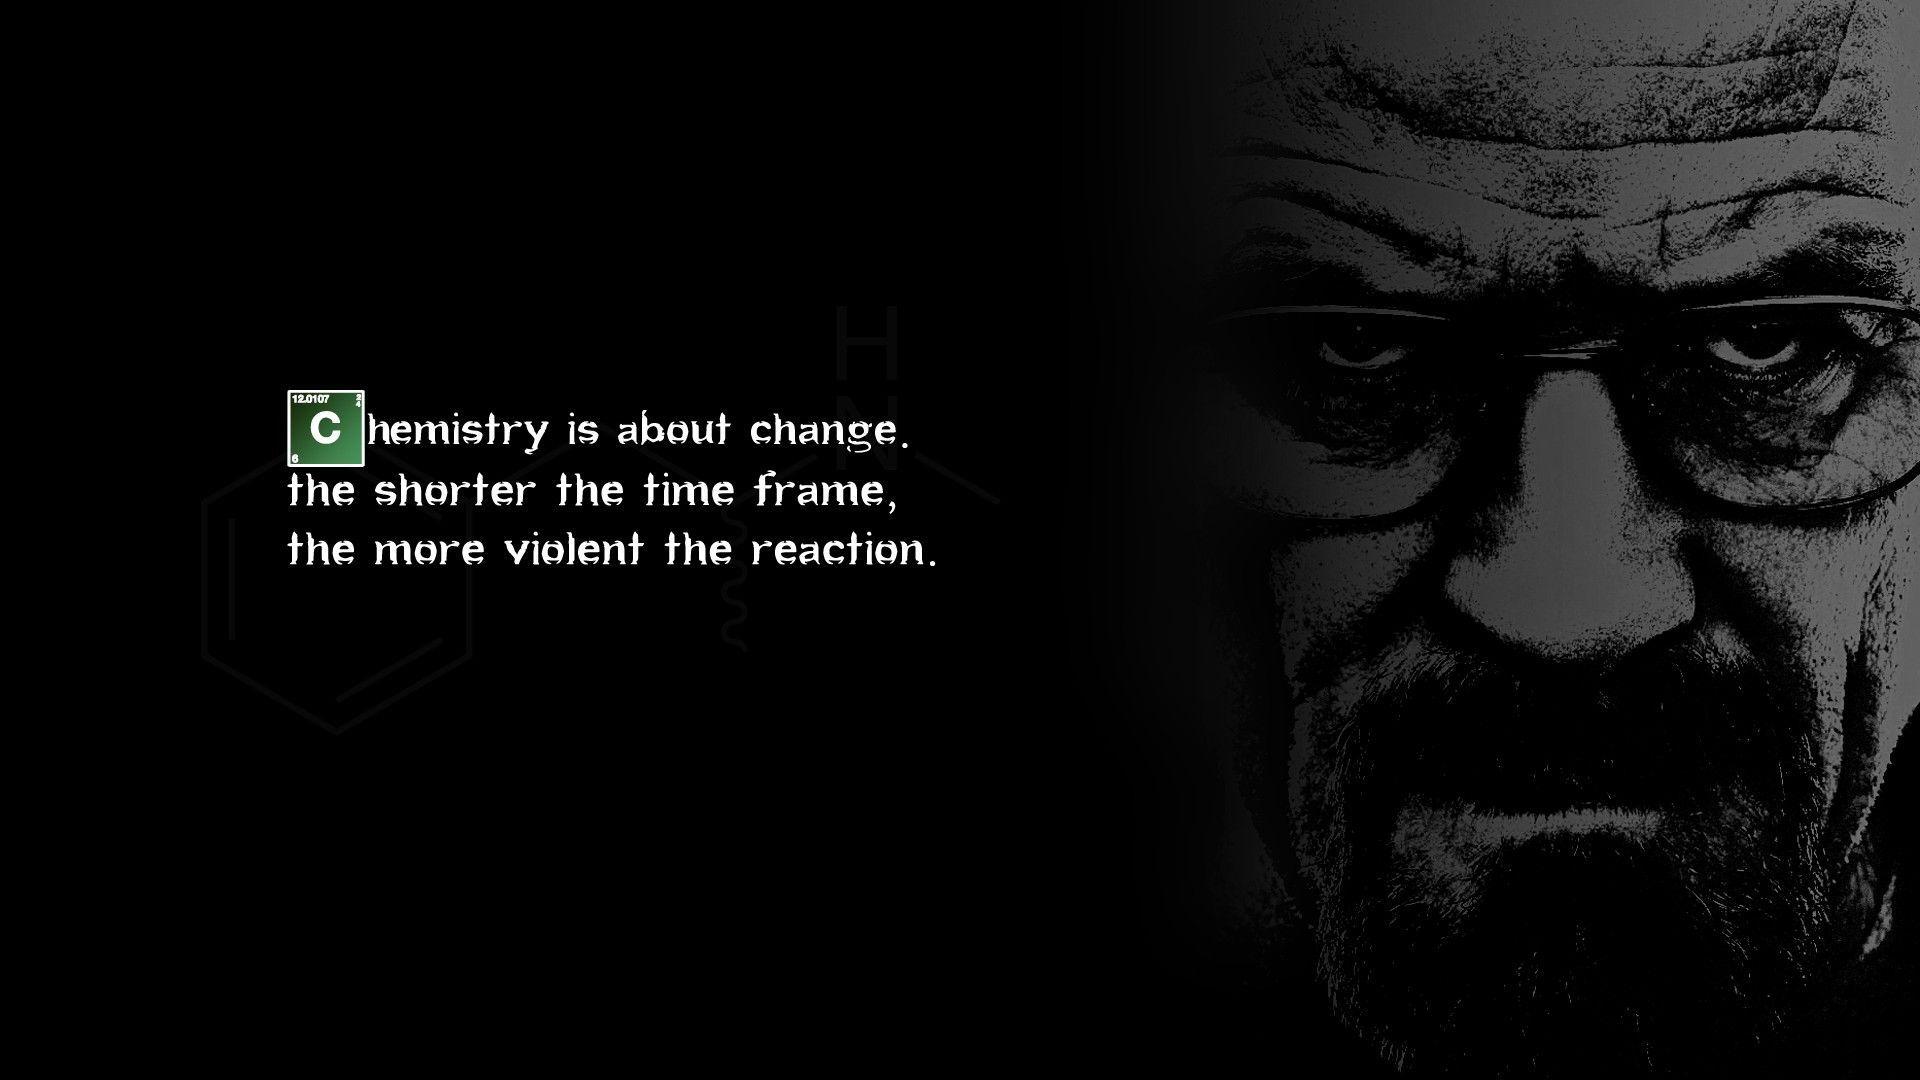 Breaking Bad Quotes wallpaper in 1024x768 resolution